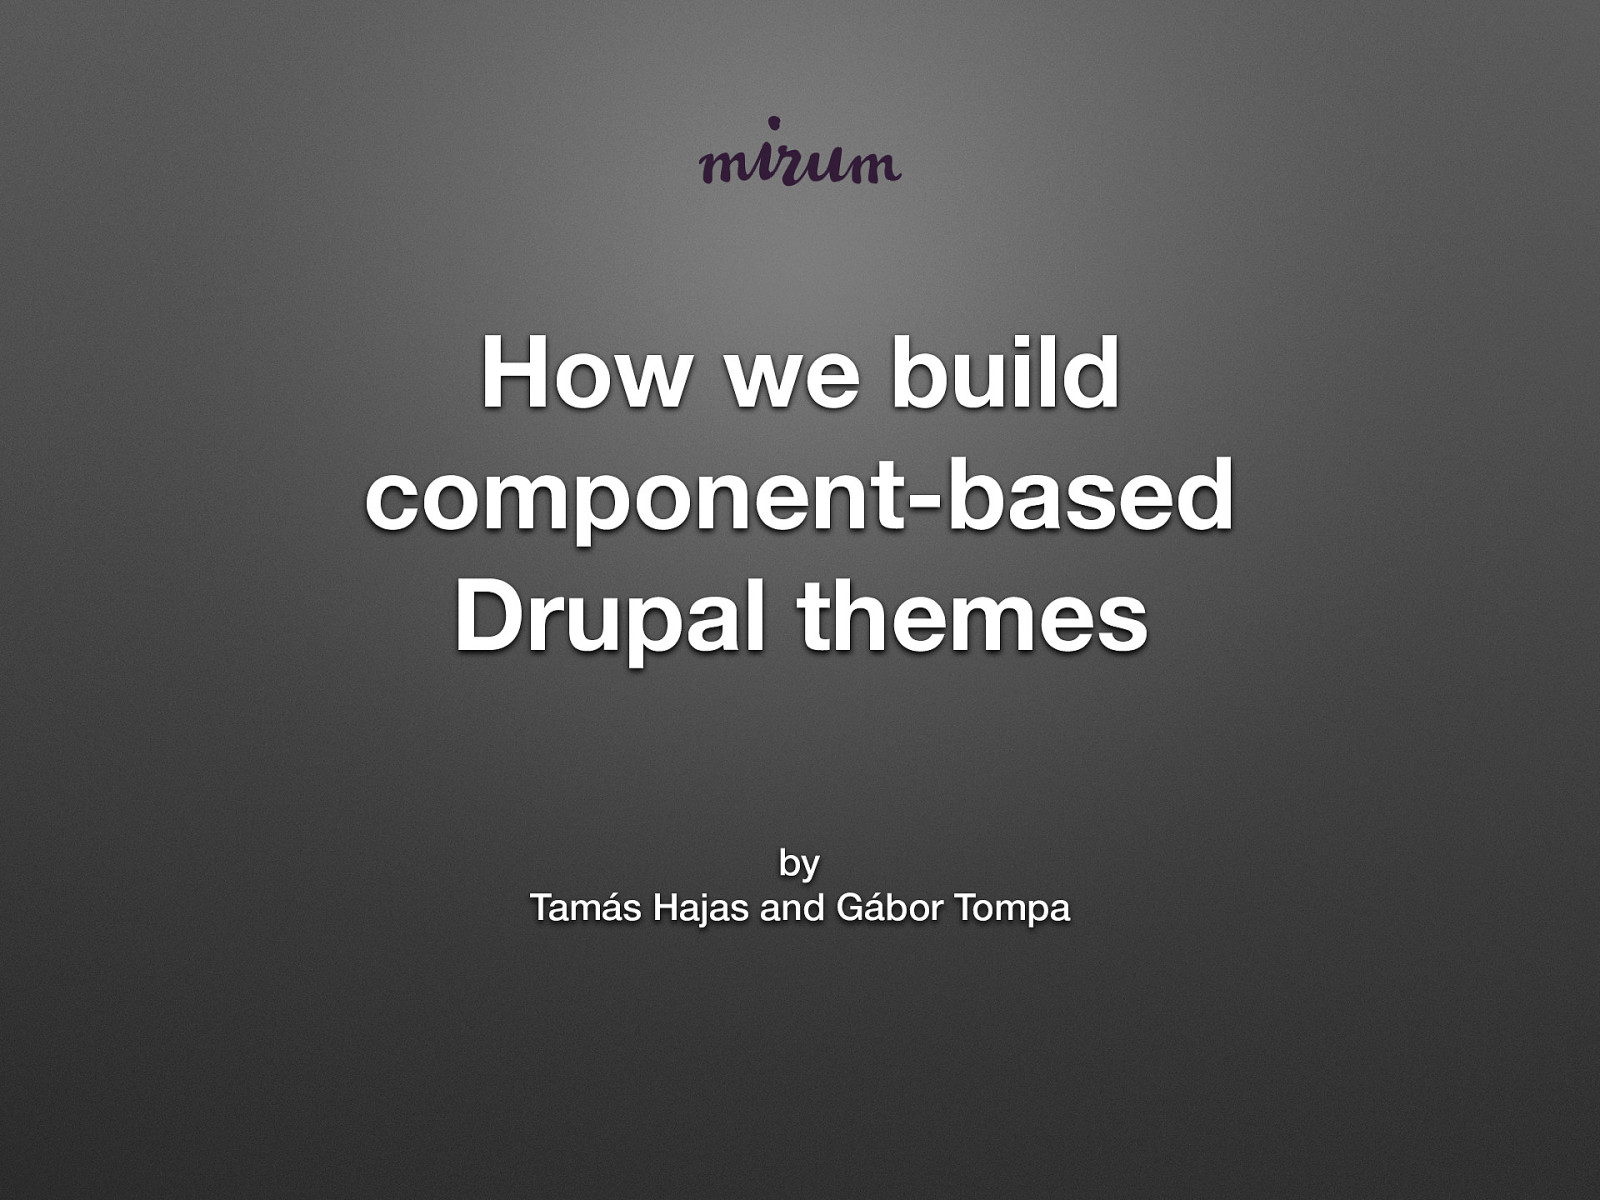 How we build component-based Drupal themes